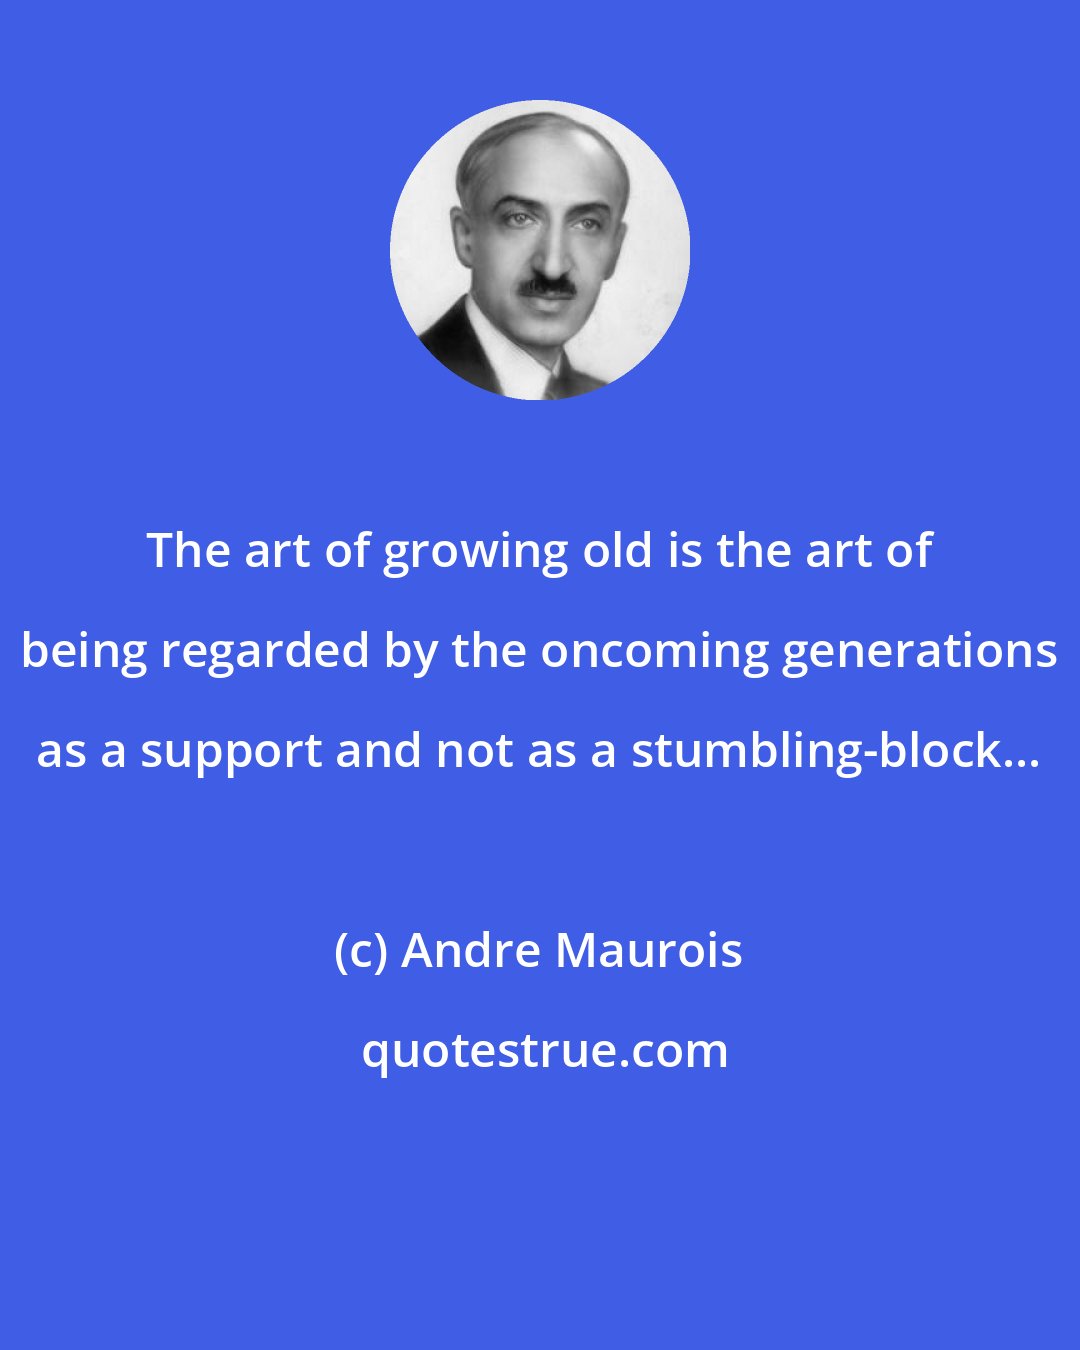 Andre Maurois: The art of growing old is the art of being regarded by the oncoming generations as a support and not as a stumbling-block...